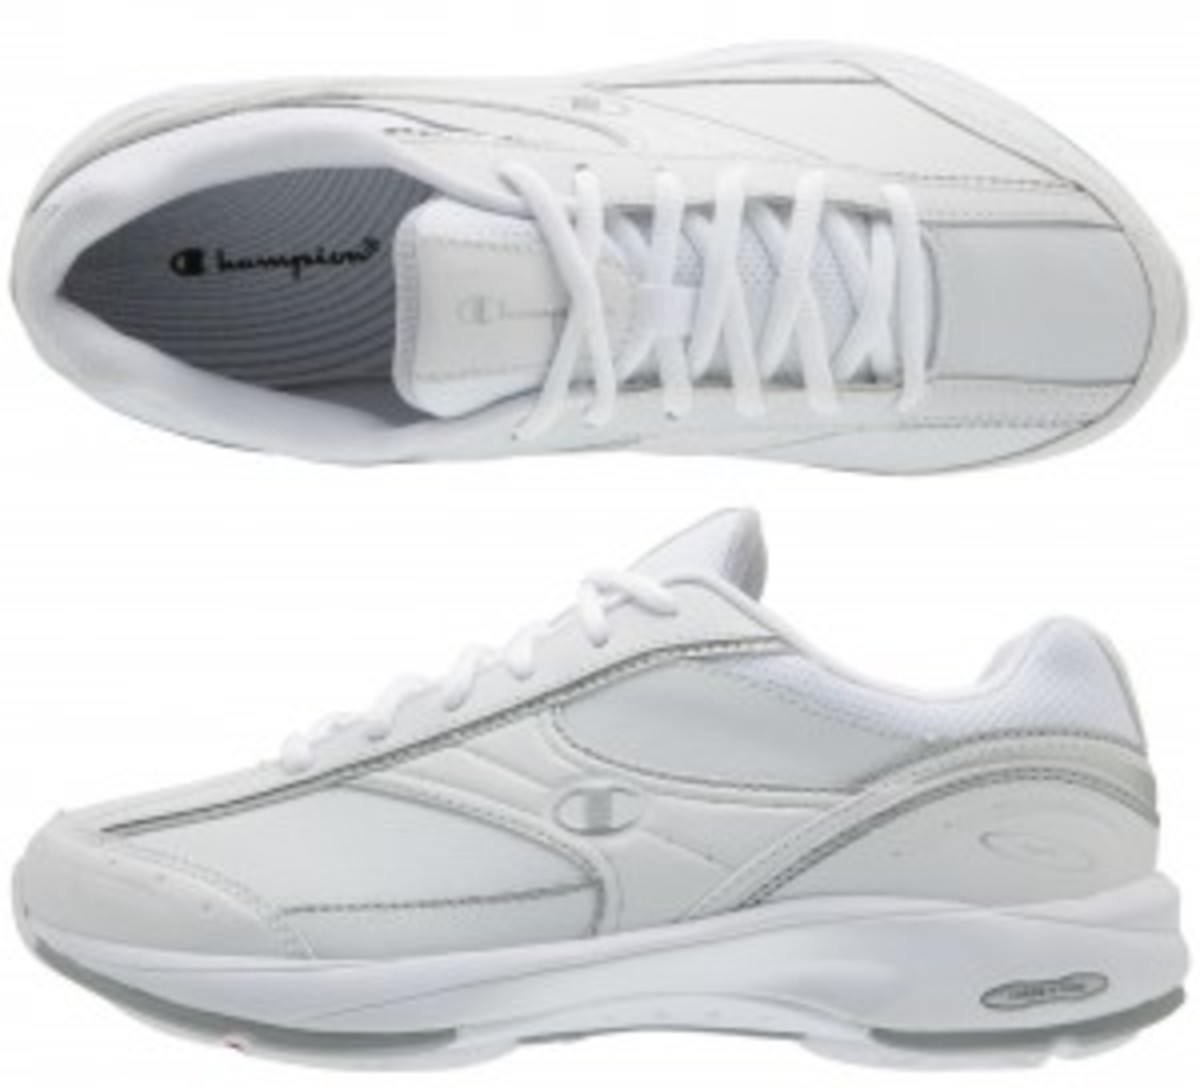 champion white sneakers payless